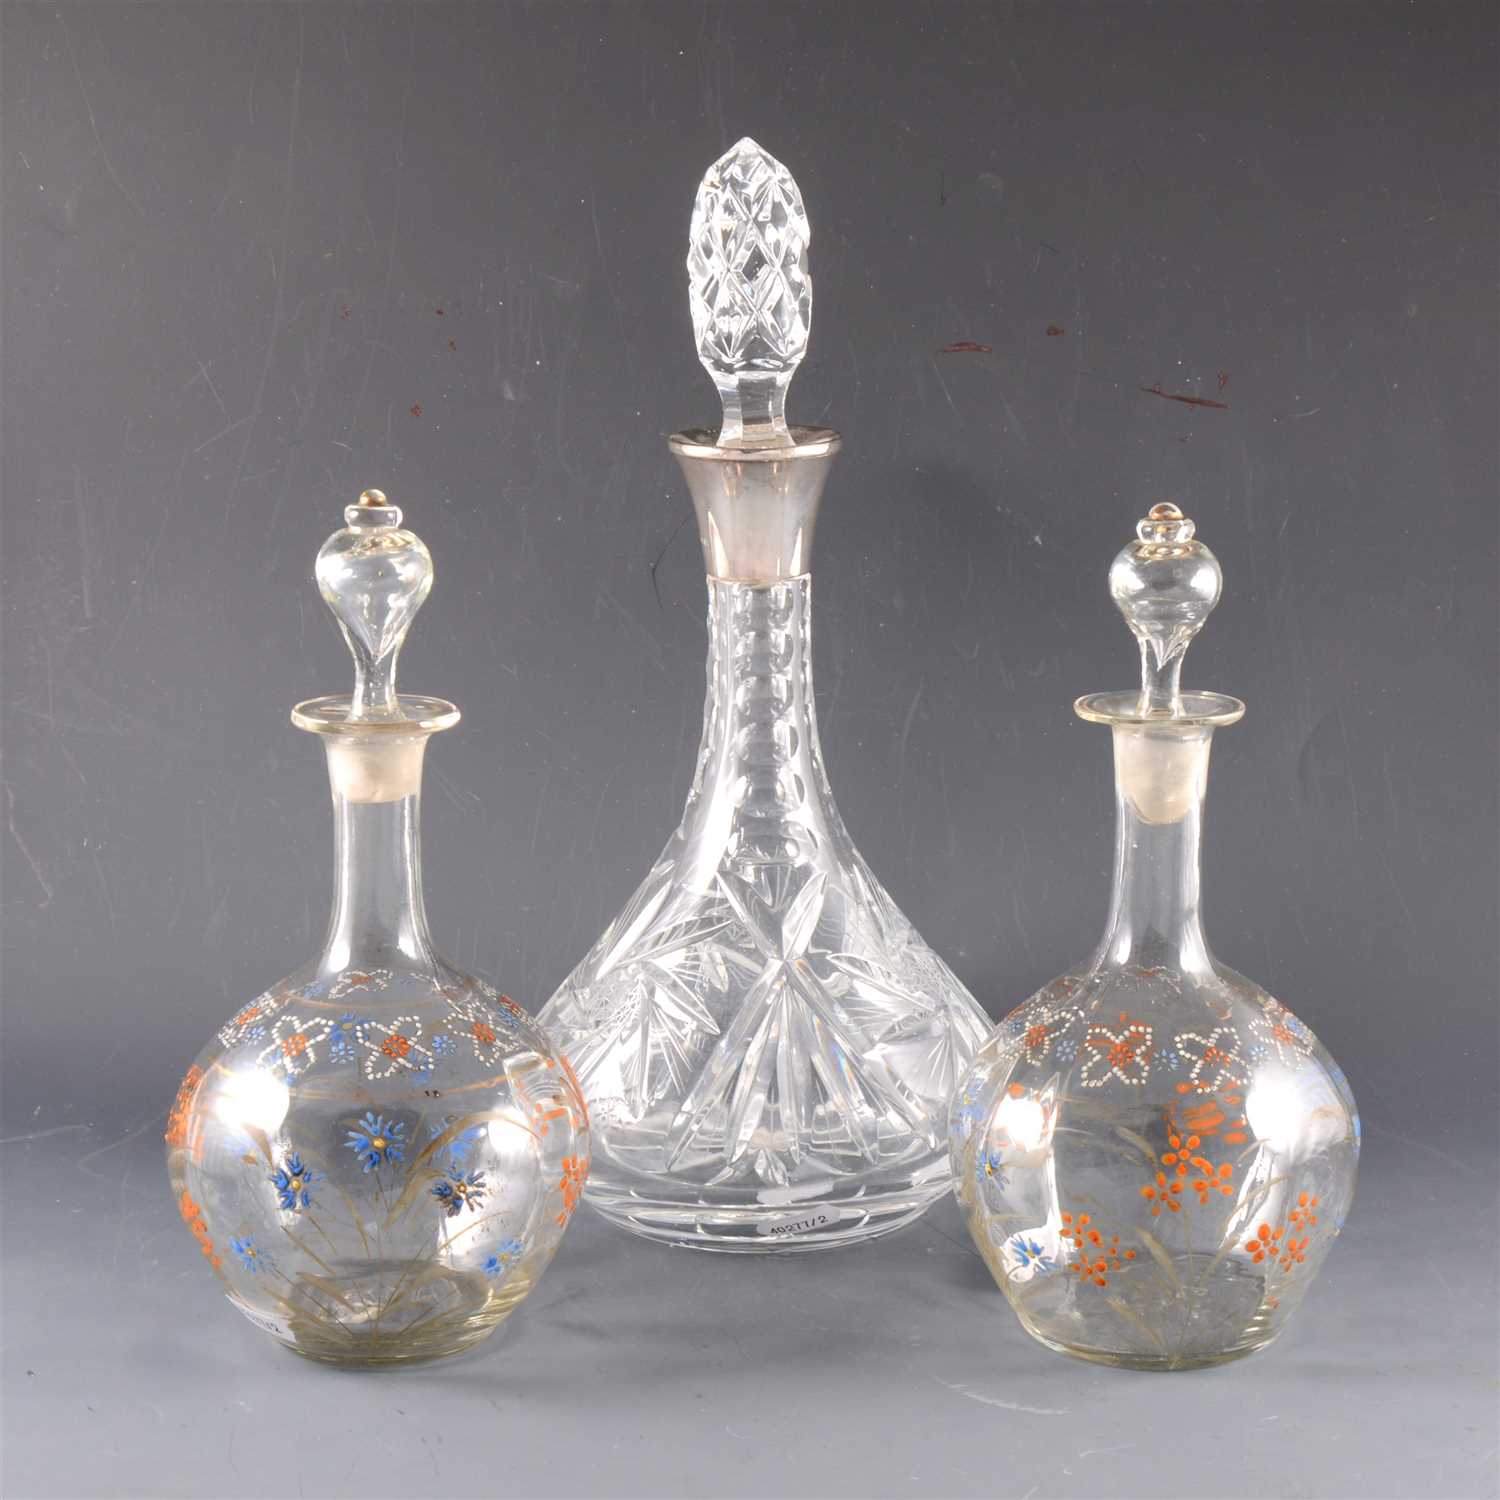 Lot 11 - A crystal decanter with silver collar and two bulbous decanters with enamelled decoration.